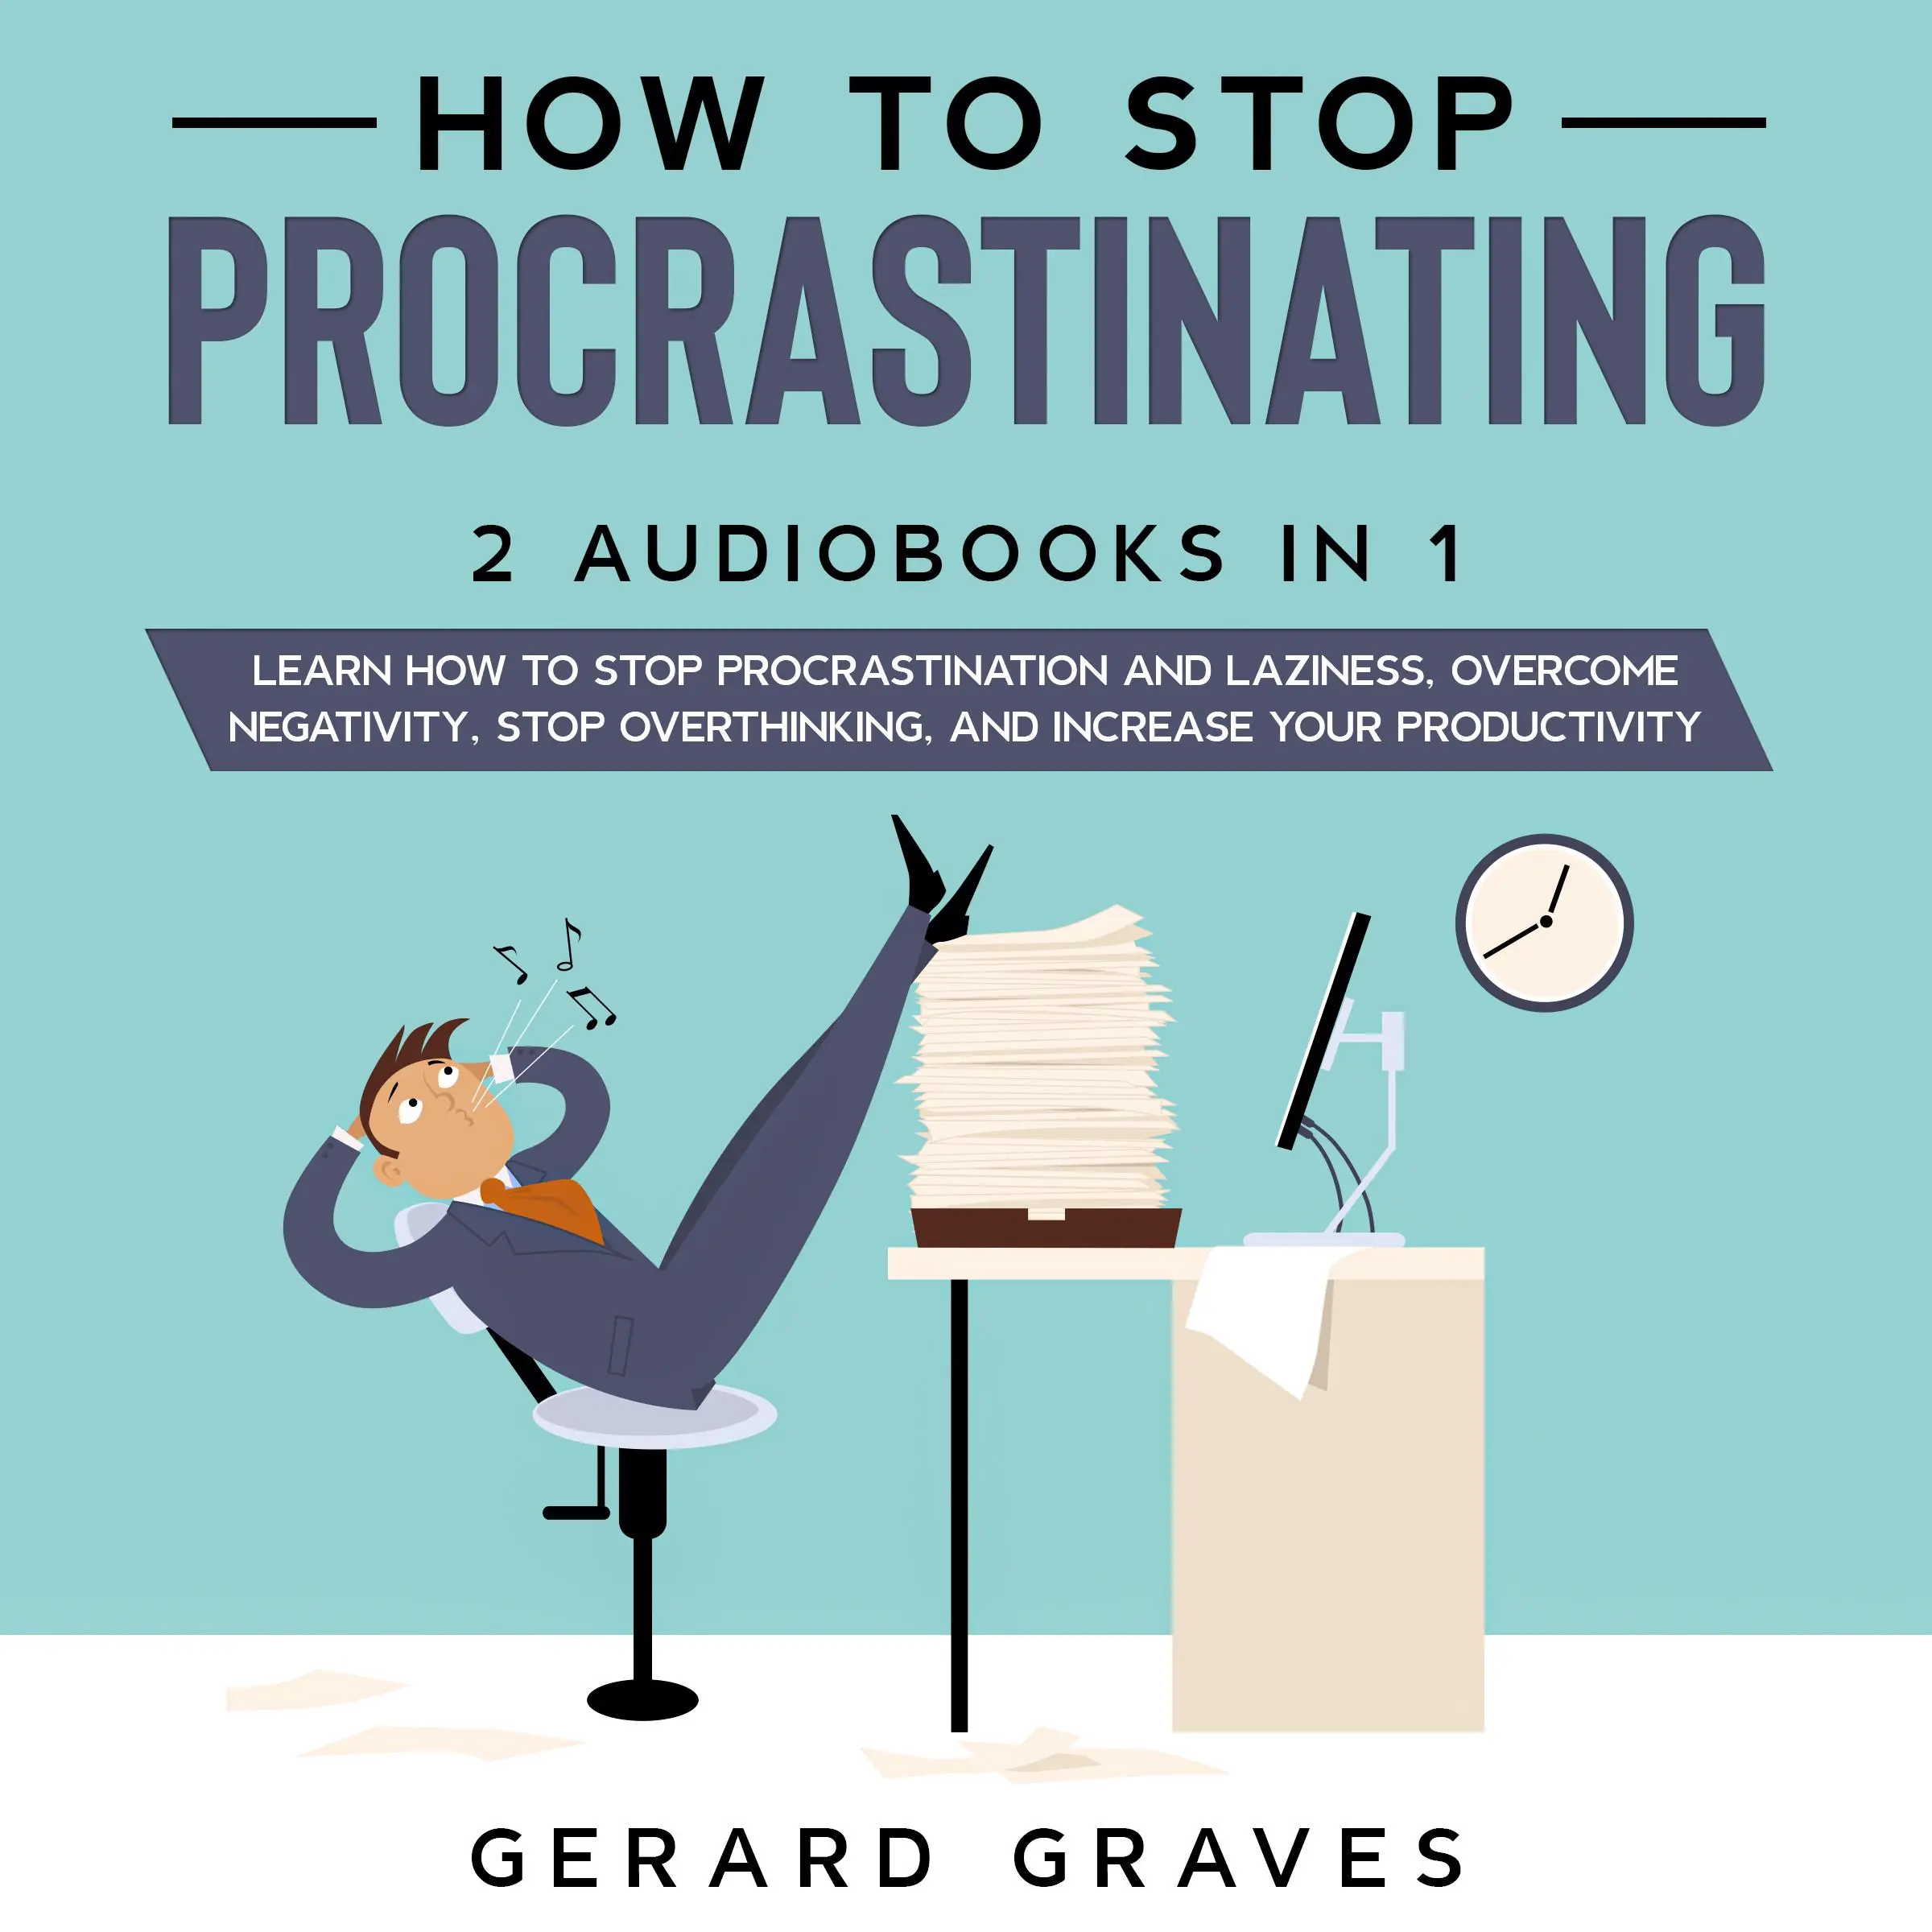 How to stop procrastinating: 2 Audiobooks in 1 - Learn How to Stop Procrastination and Laziness, Overcome Negativity, Stop Overthinking, and Increase Your Productivity Audiobook by Gerard Graves